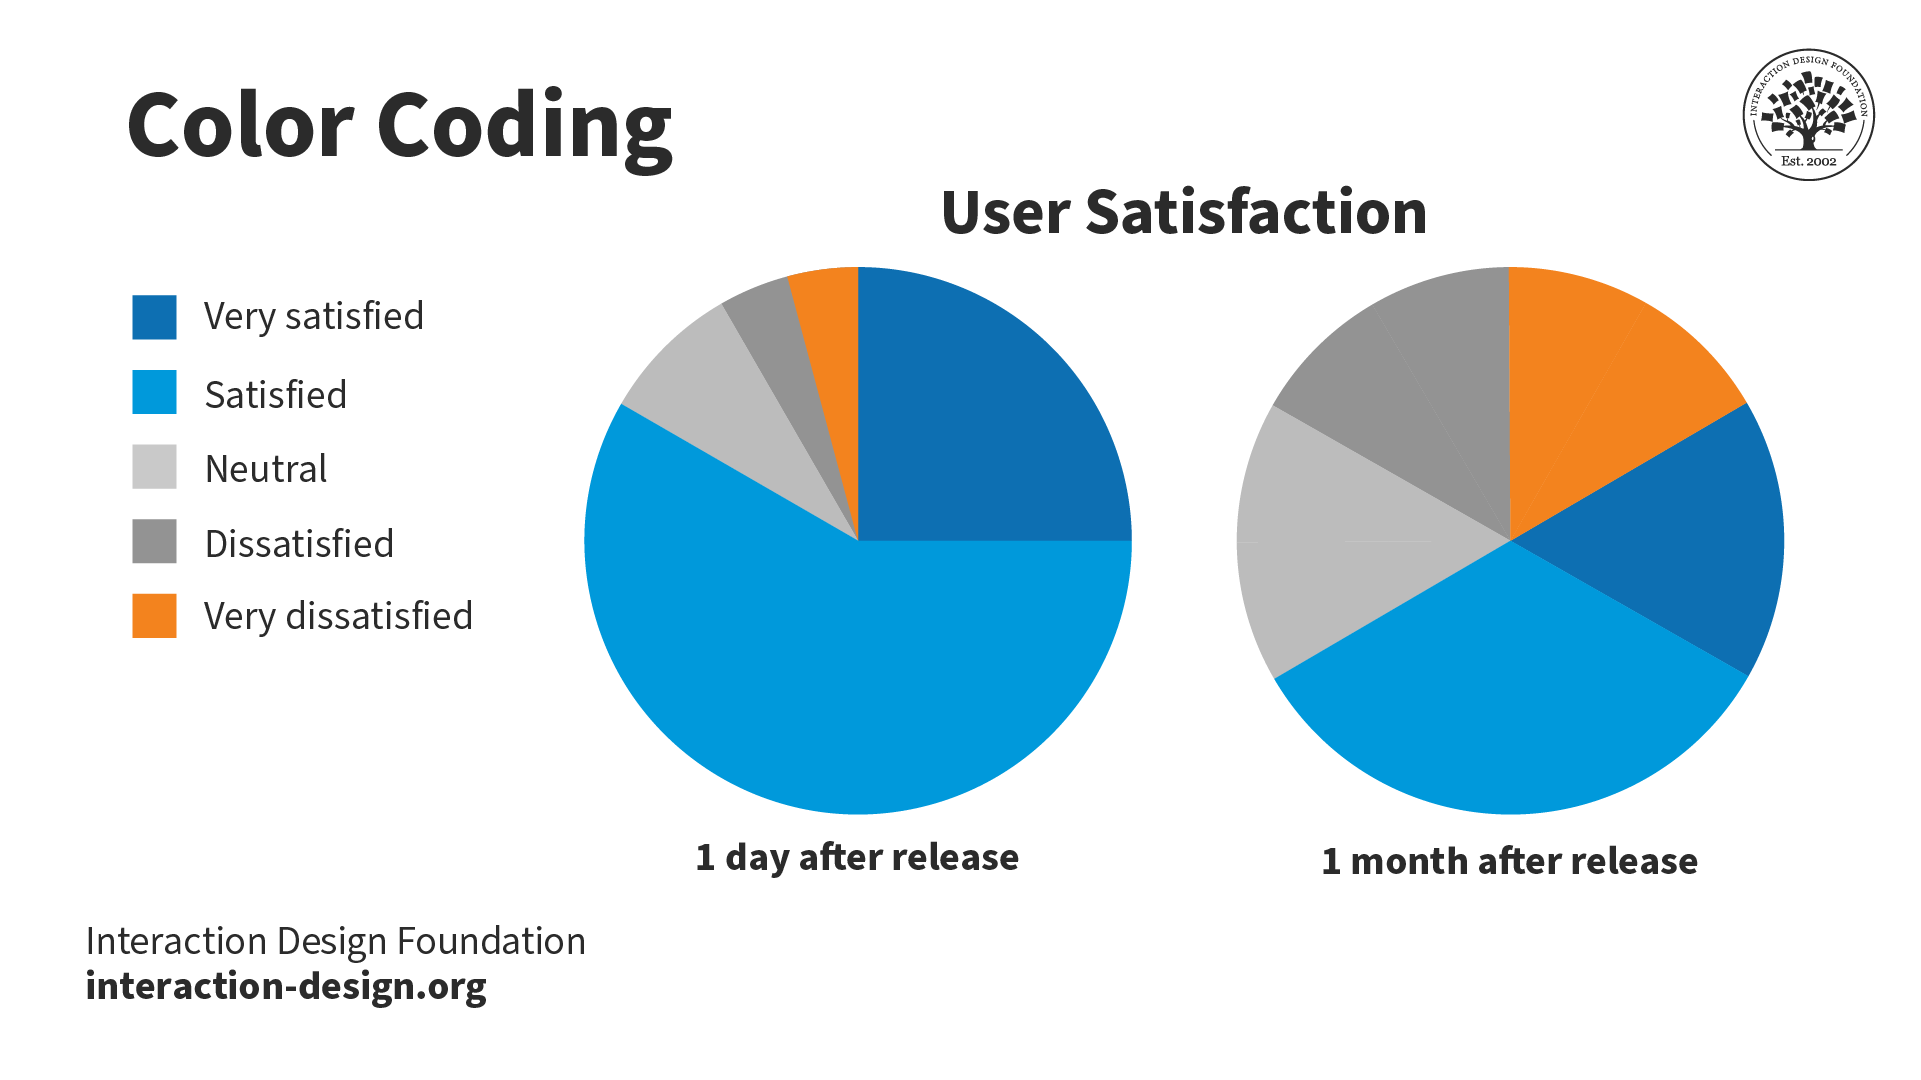 Two pie charts showing user satisfaction. One visualizes data 1 day after release, and the other 1 month after release. The colors are consistent between both charts, but the segment sizes are different.